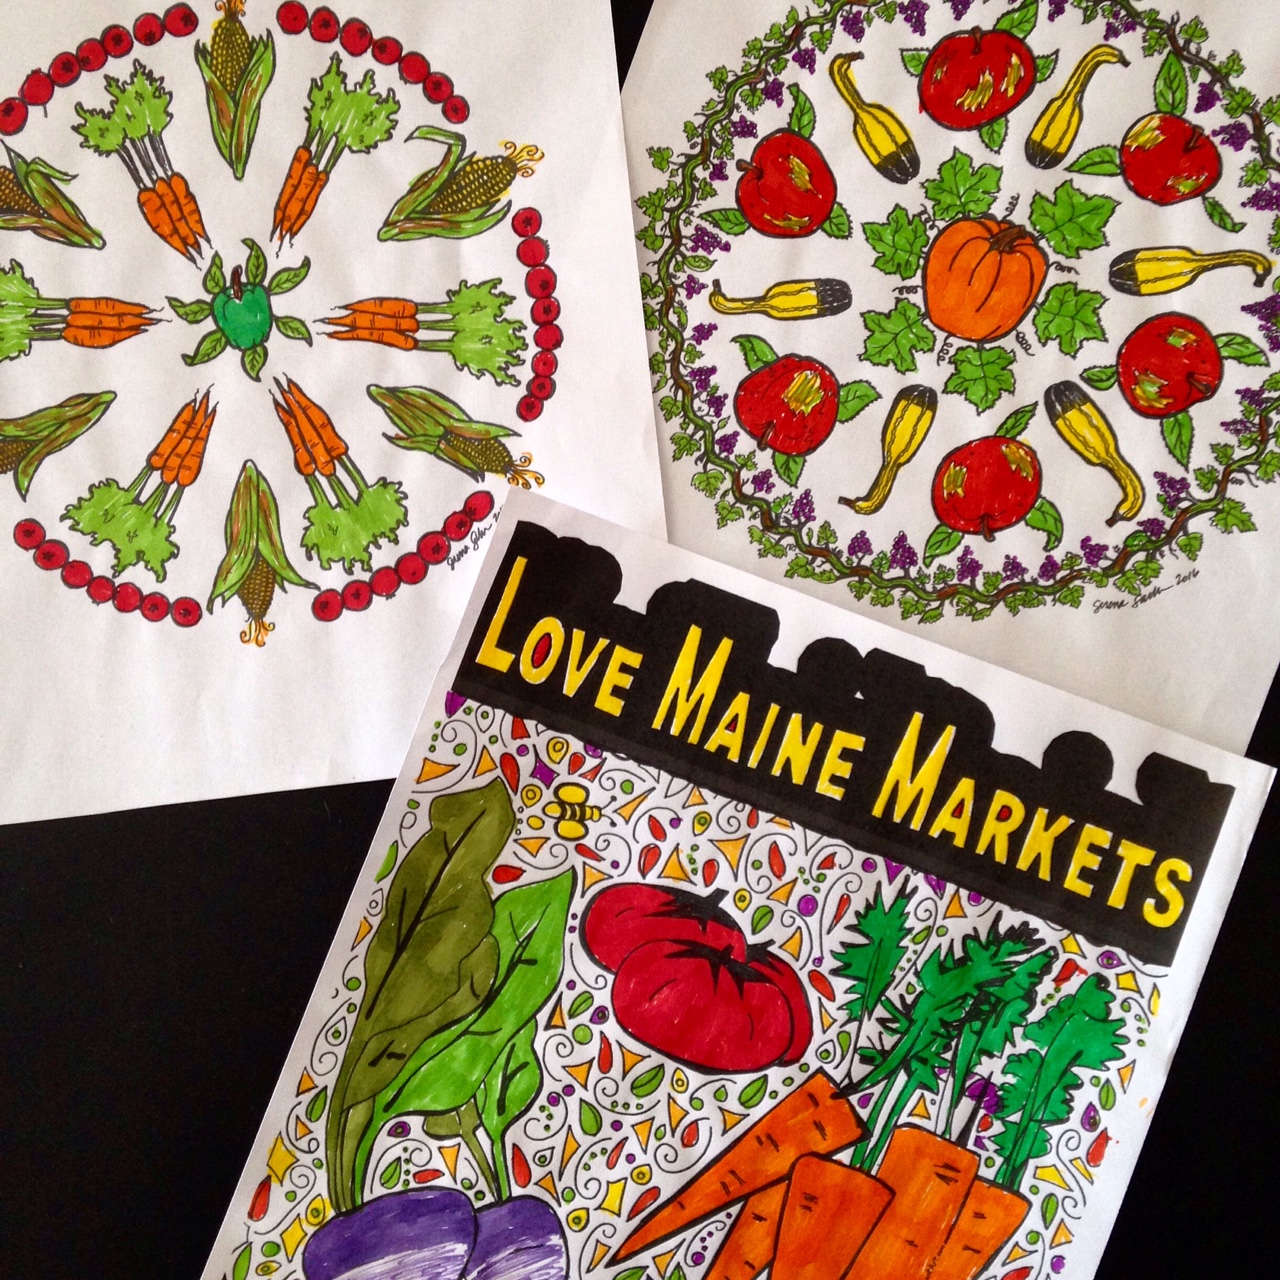 https://mainefarmersmarkets.org/wp-content/uploads/2016/06/Snapshot-coloring-pages-colored.jpg